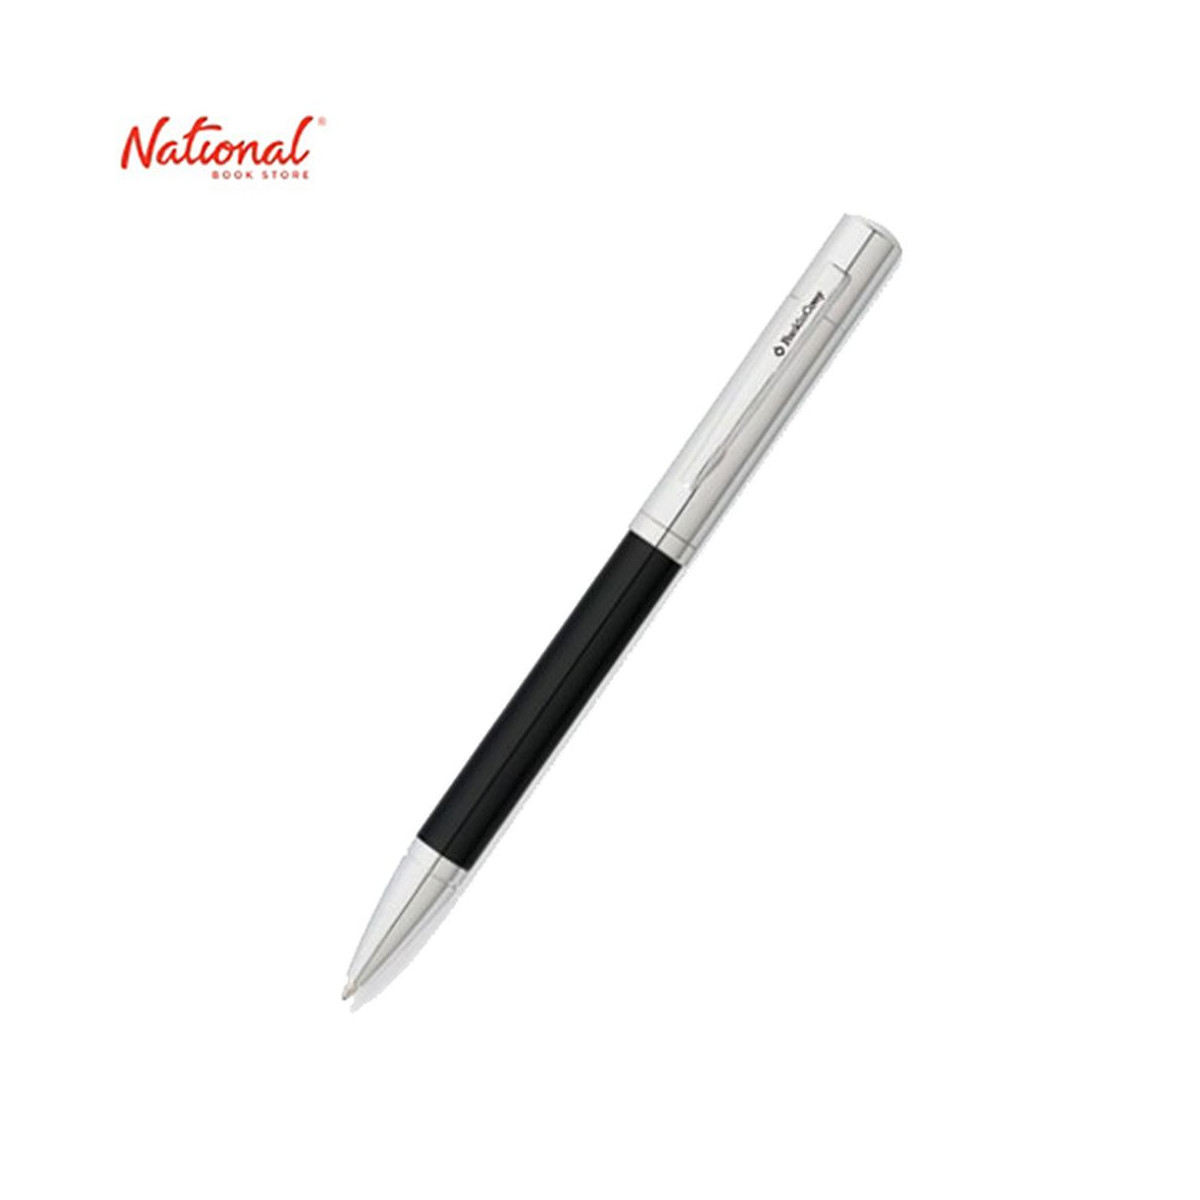 Franklin Covey Greenwich Twistable Fine Ballpoint Pen Tuxedo Black Lacquer with Chrome Appointments